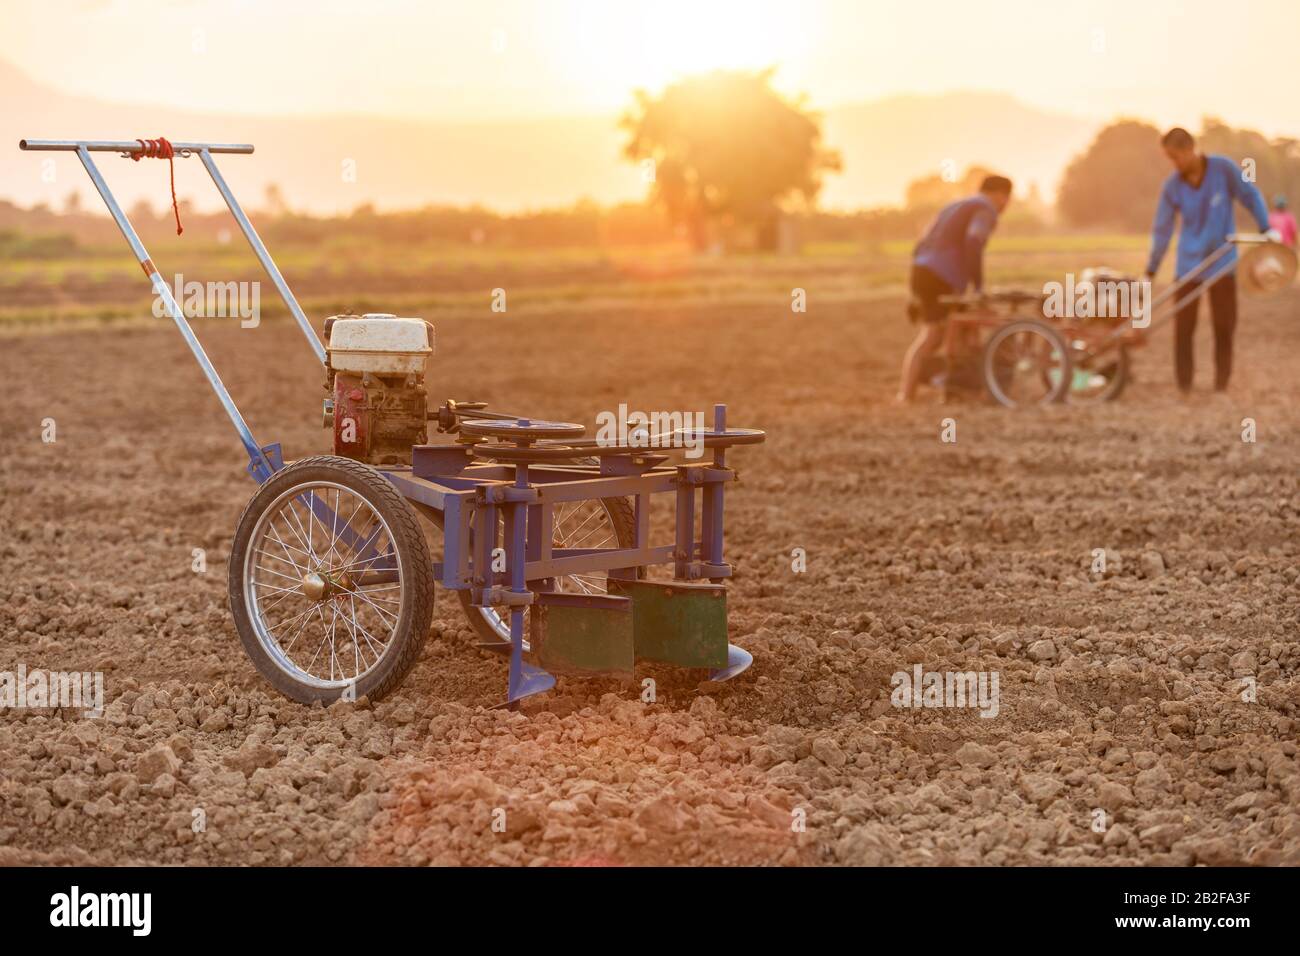 Thai farmer working in the land and making the hole on soil with machine to prepare the soil for growth tobacco season in Thailand. Shooting sunset ti Stock Photo